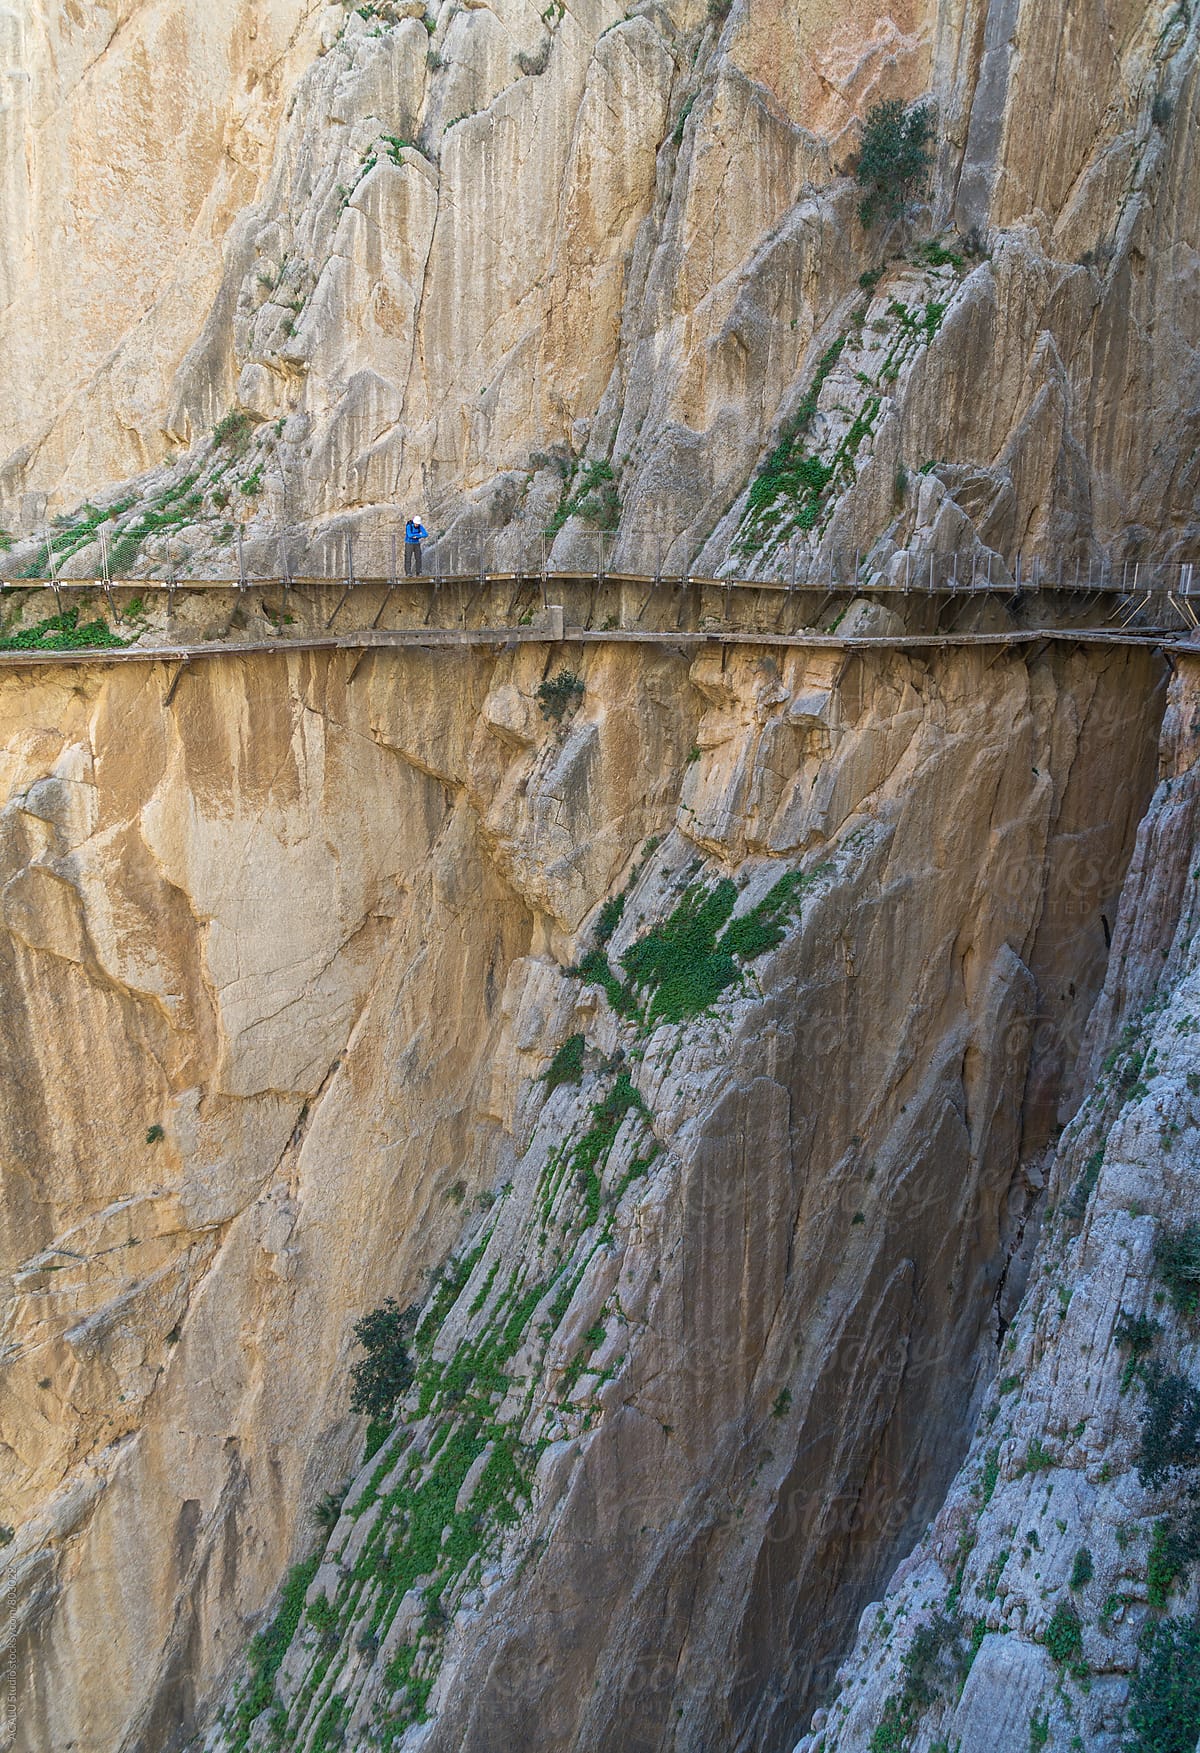 Hiker looking down at the edge of a cliff in Caminito del Rey